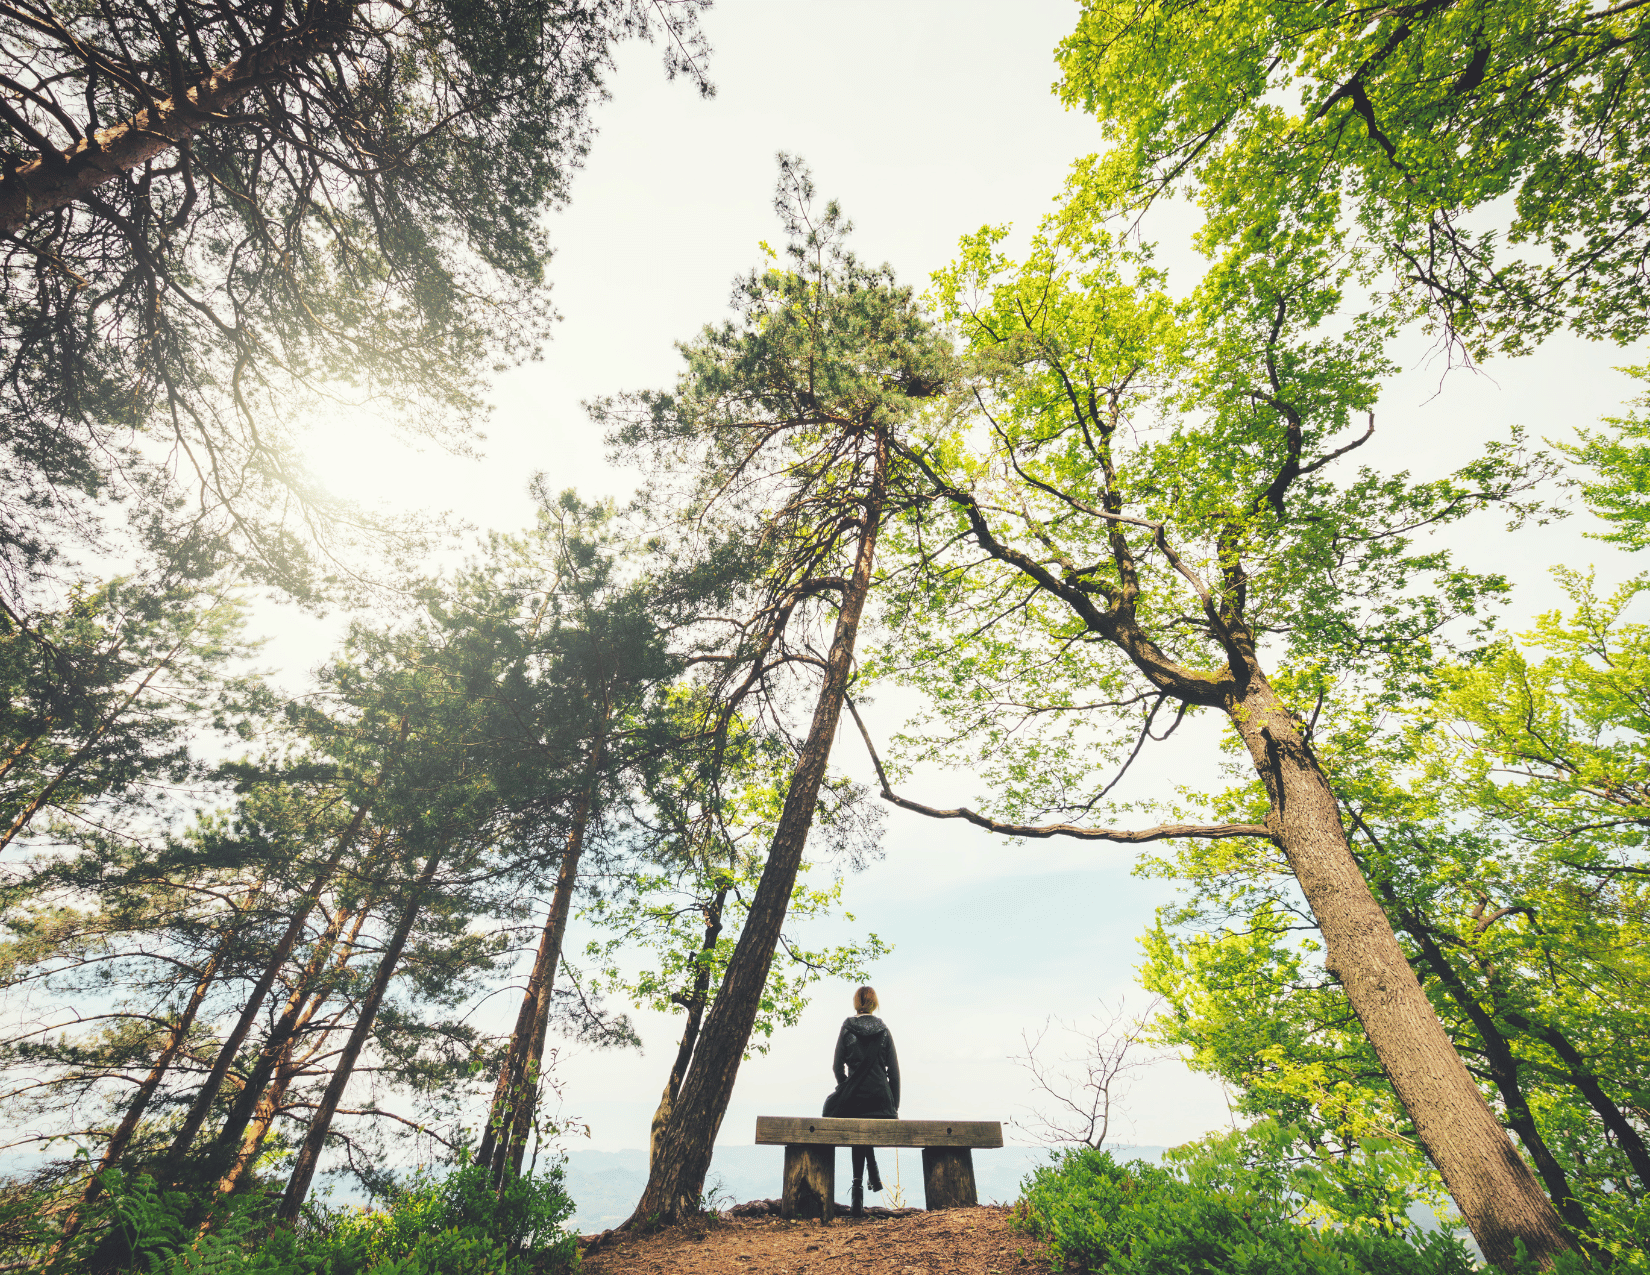 Person sitting in a forest, looking out onto lake.